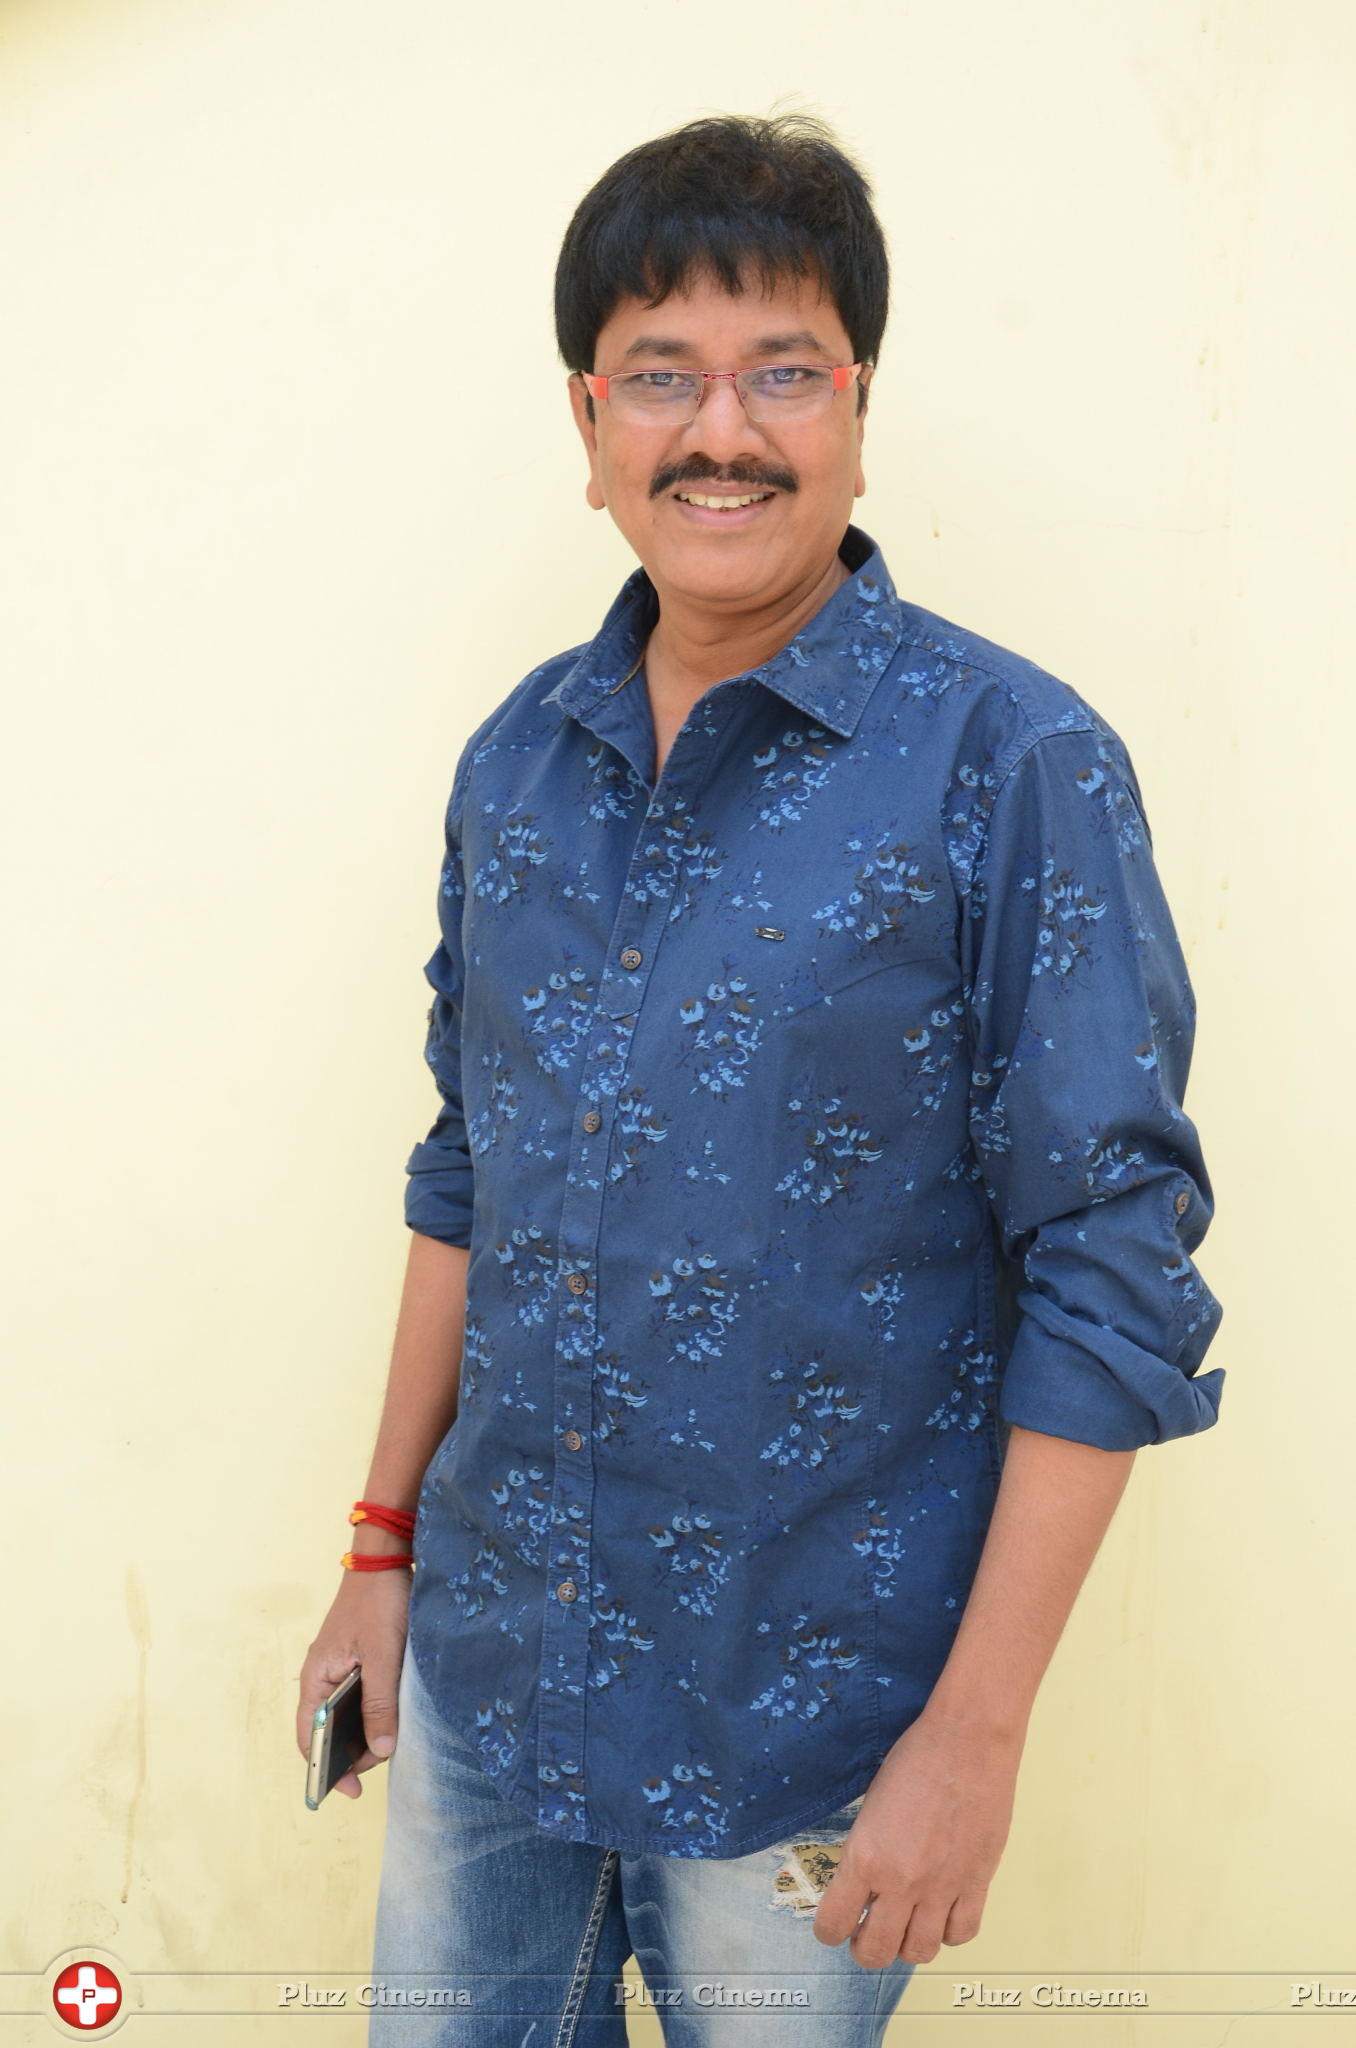 Director Nageswara Reddy Interview Photos | Picture 1286685